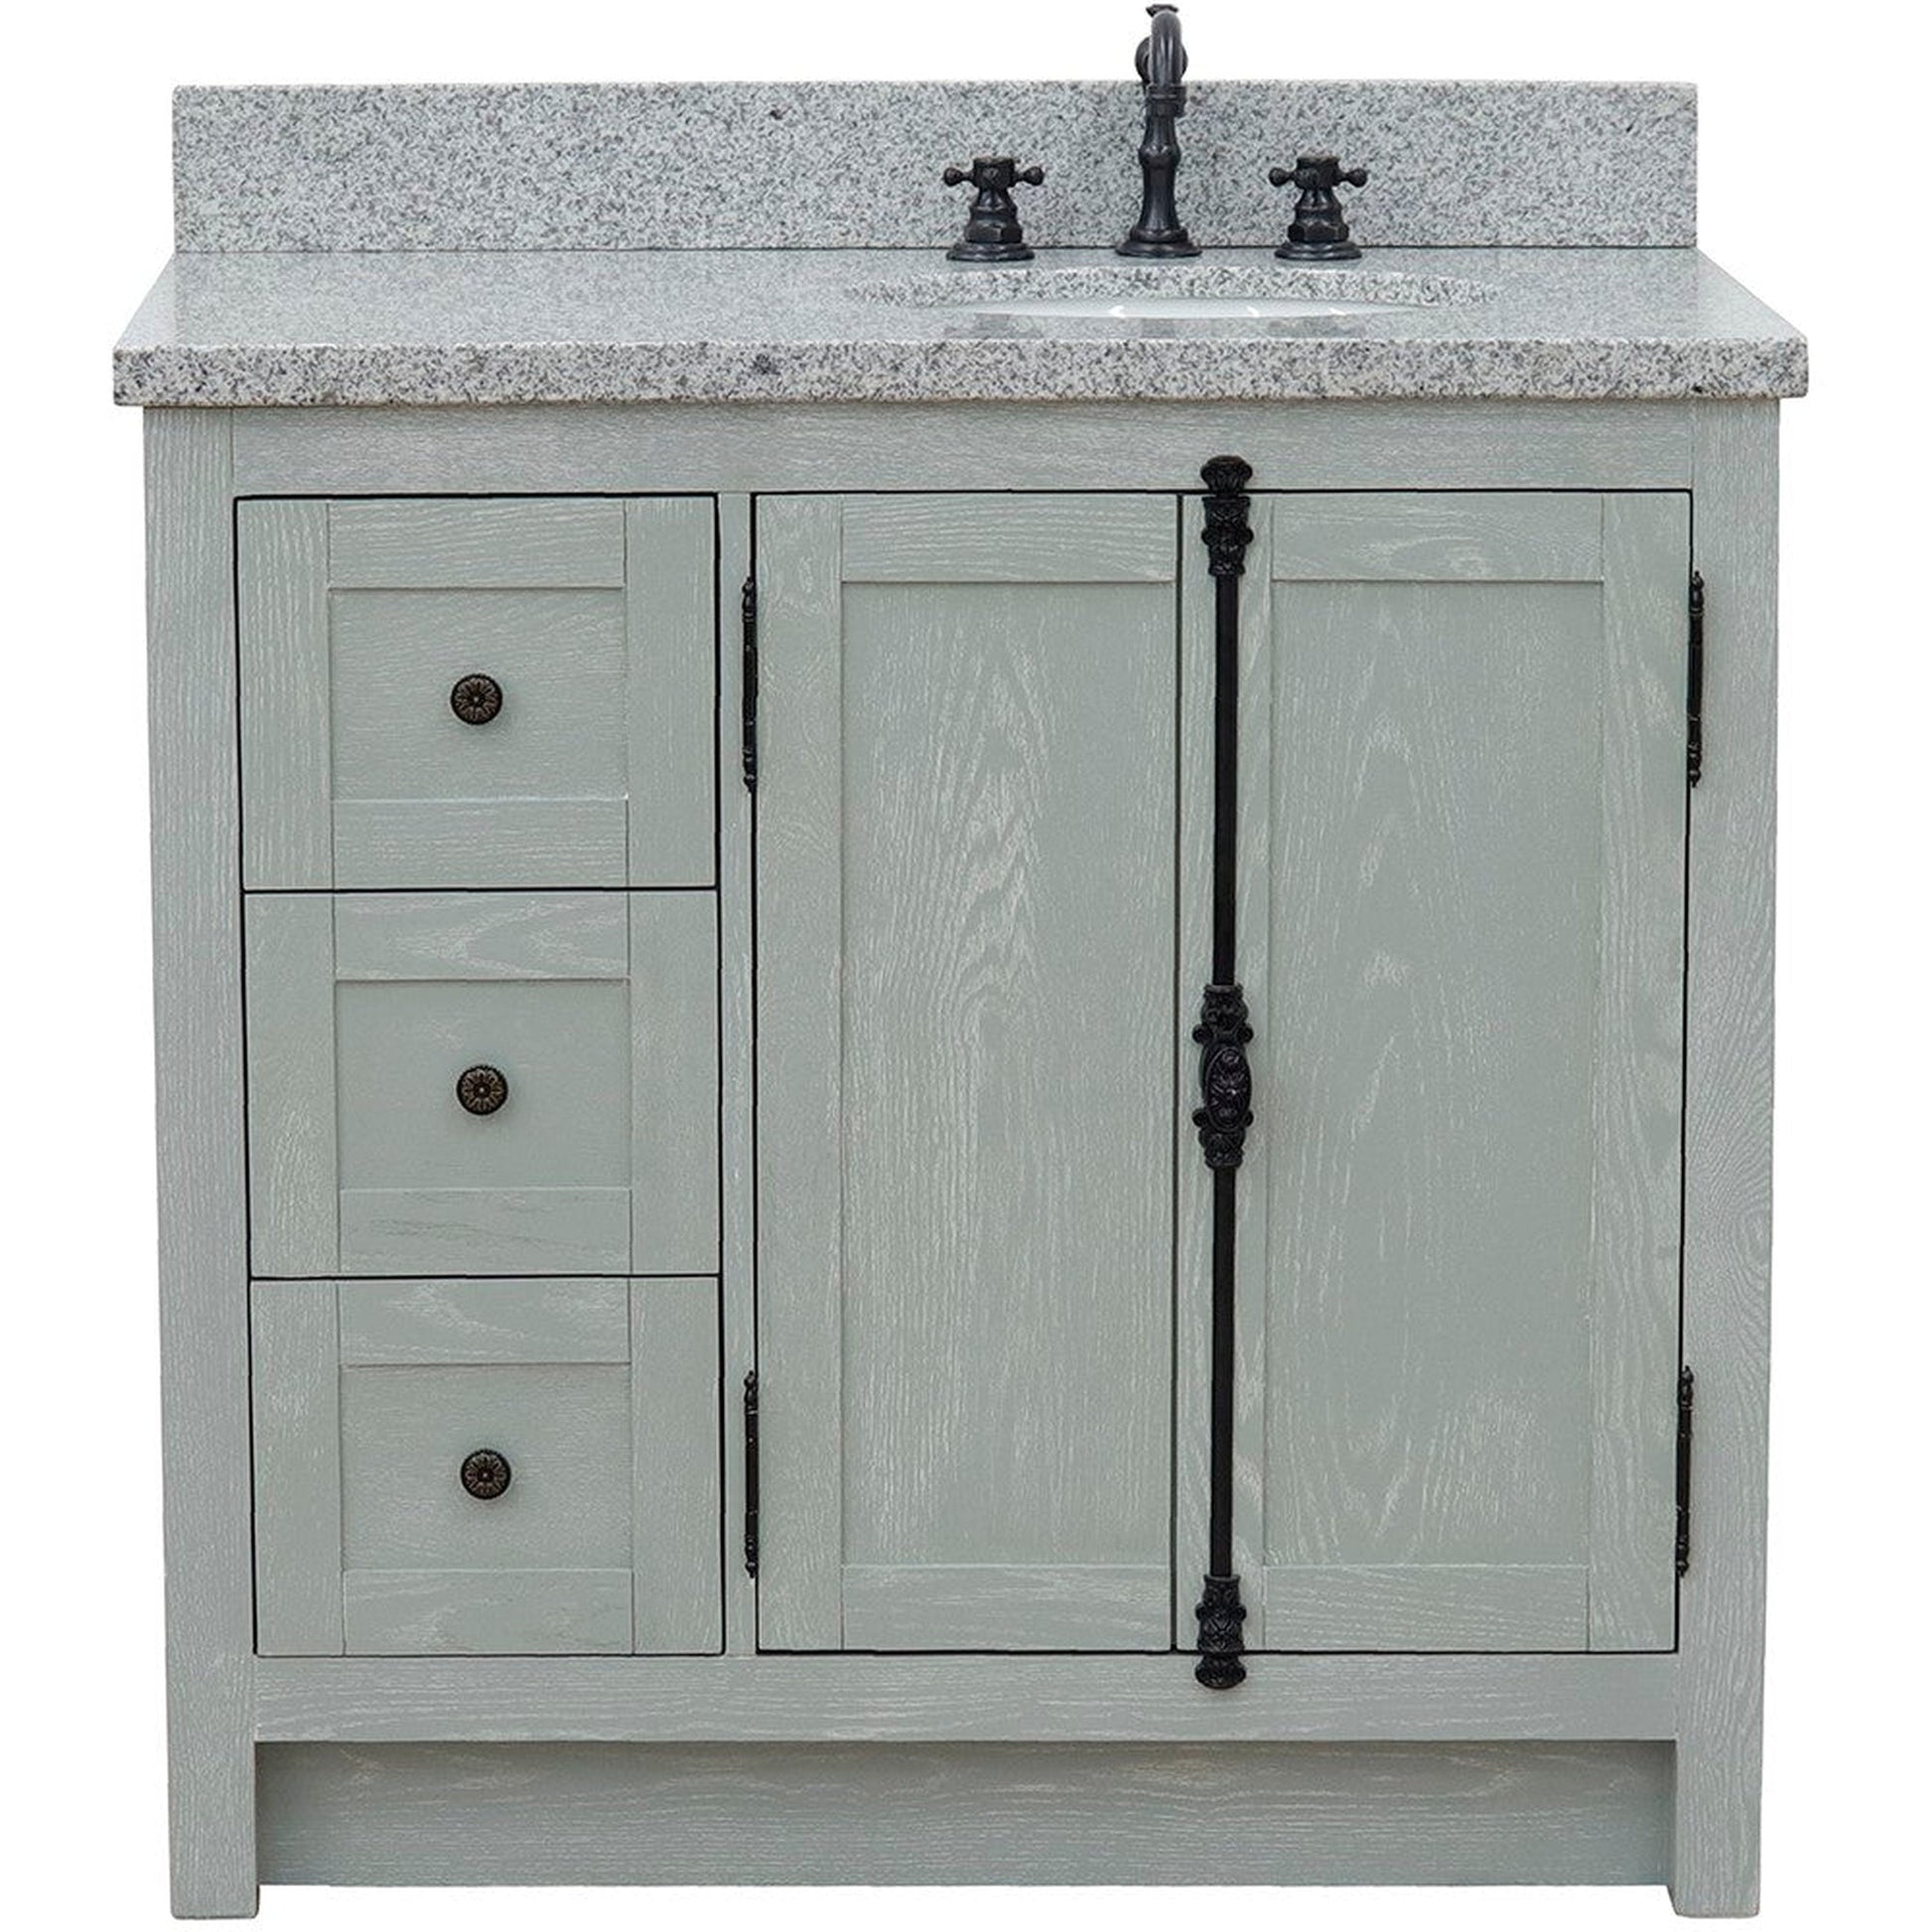 Bellaterra Home Plantation 37" 2-Door 3-Drawer Gray Ash Freestanding Vanity Set With Ceramic Right Offset Undermount Oval Sink and Gray Granite Top